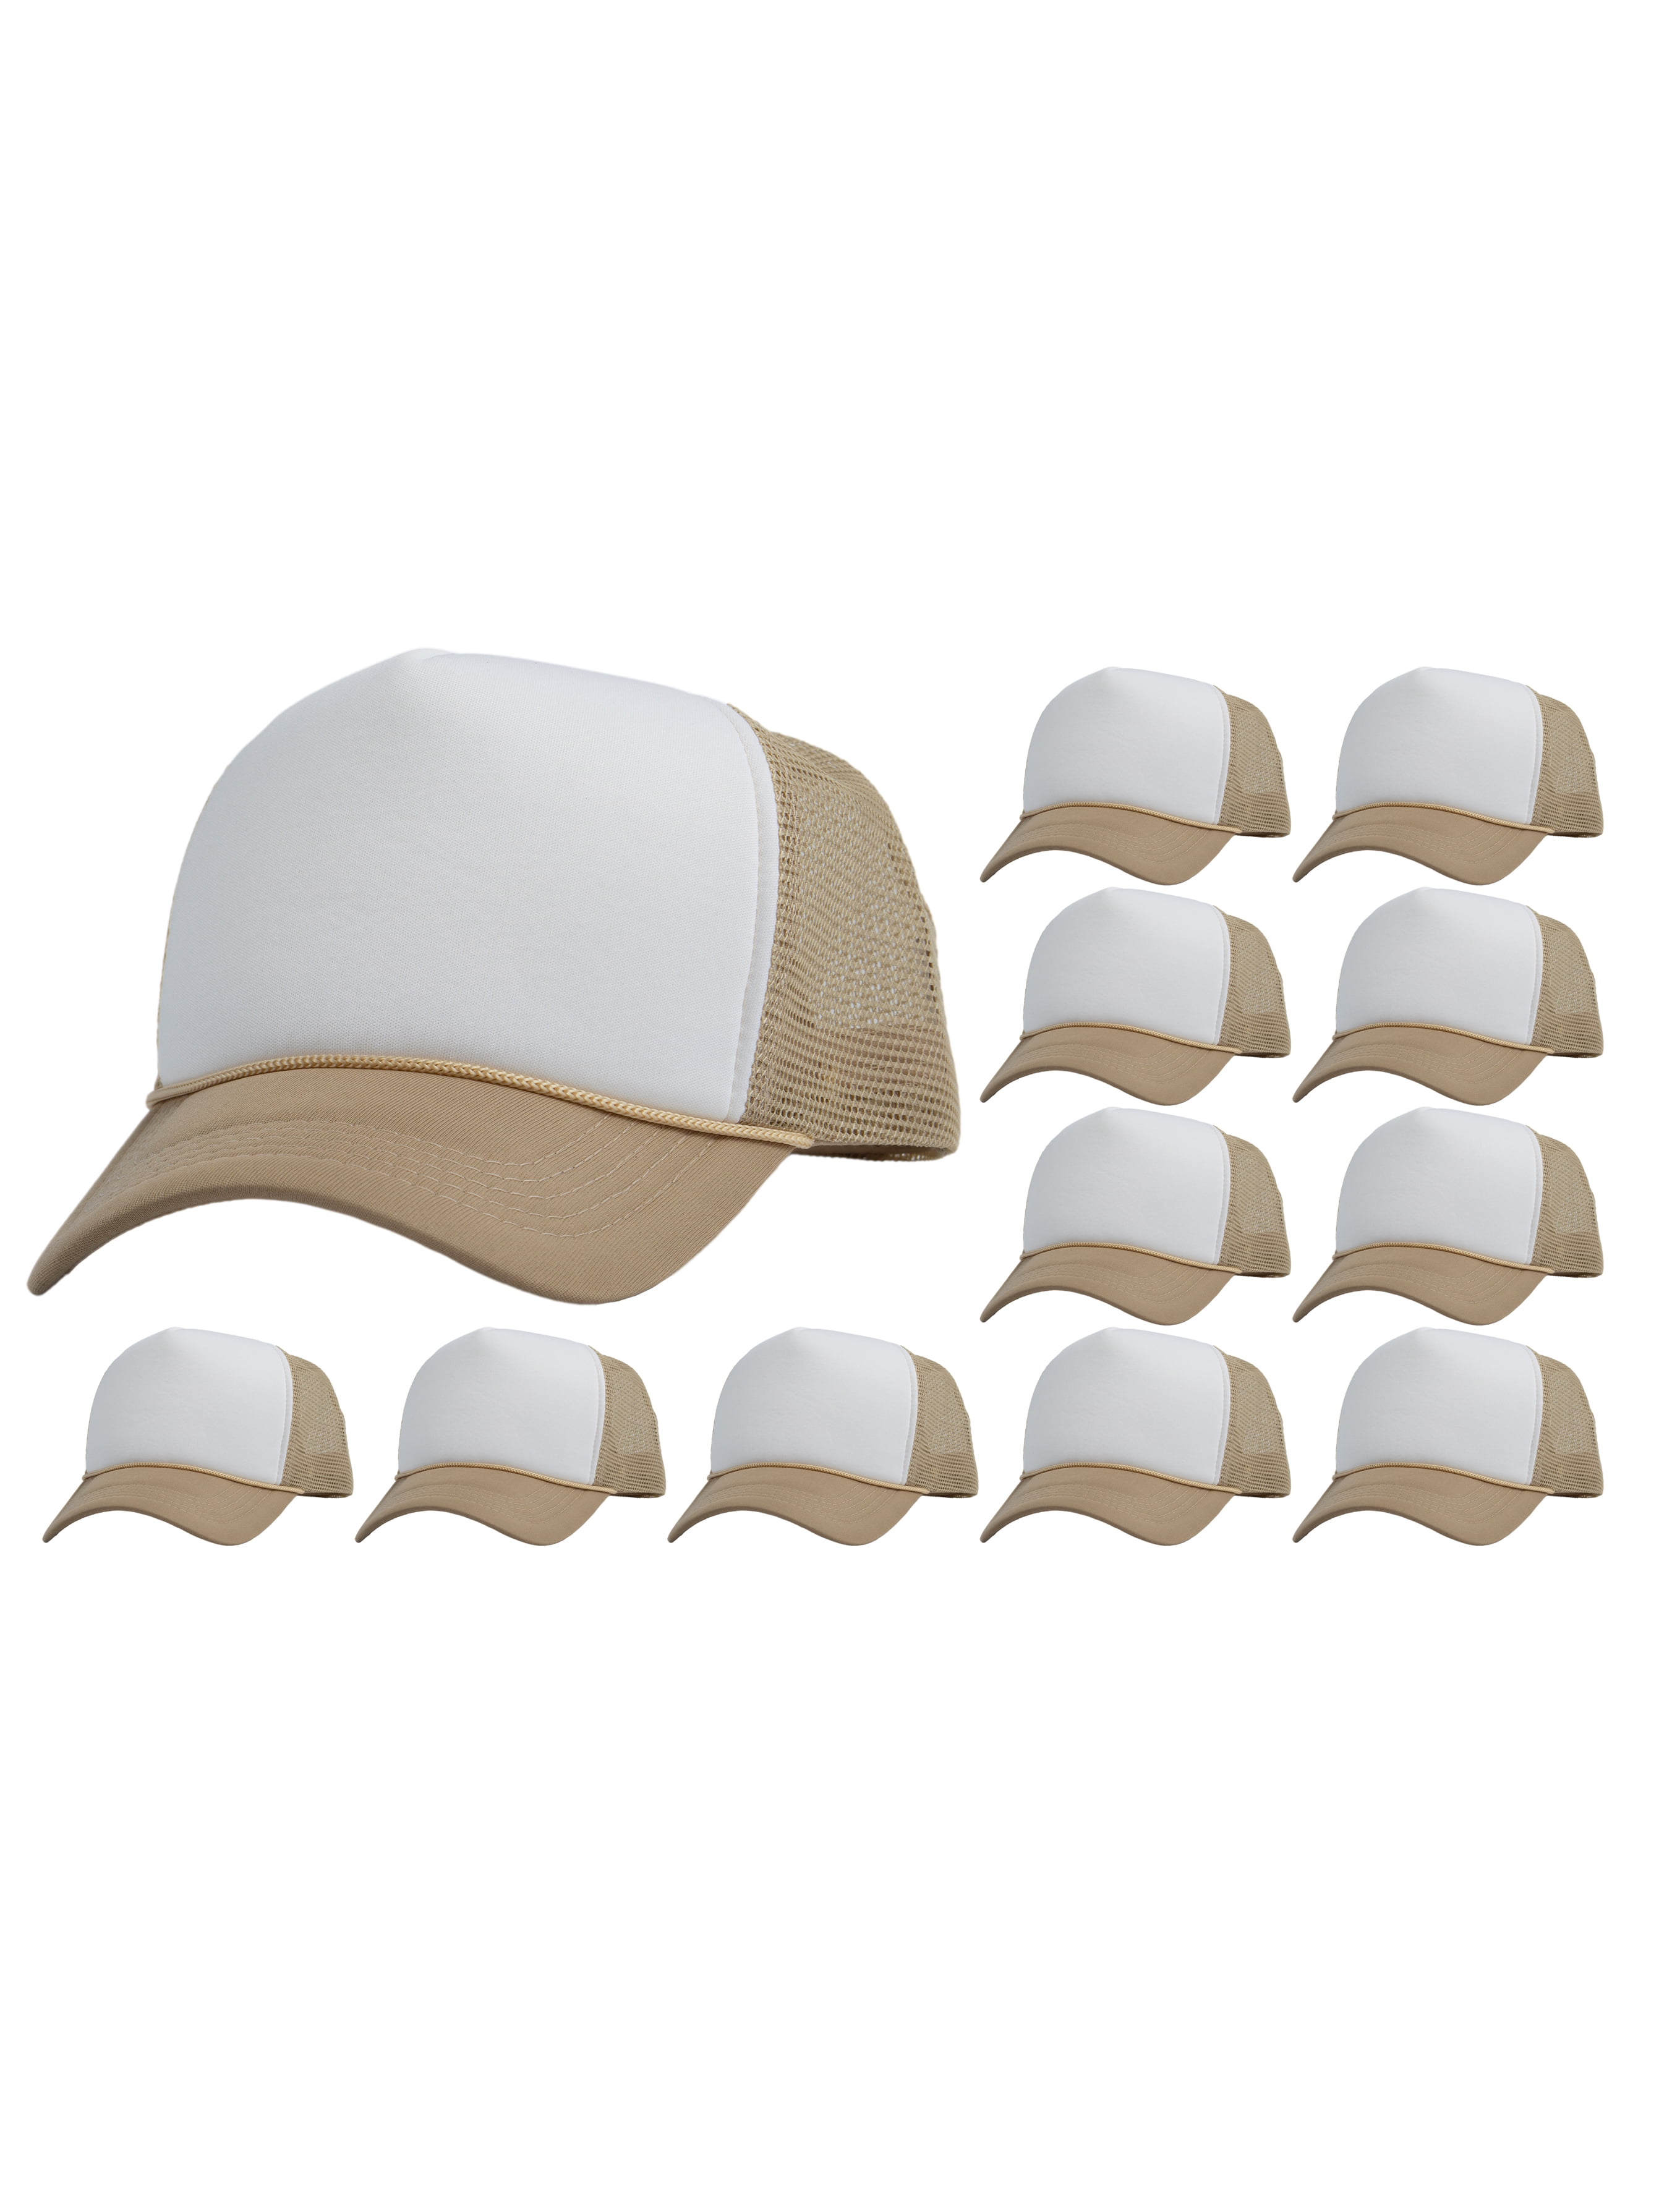 Sublimation Hat Youth/ Adult Baseball Cap Trucker Mesh Cap Brown